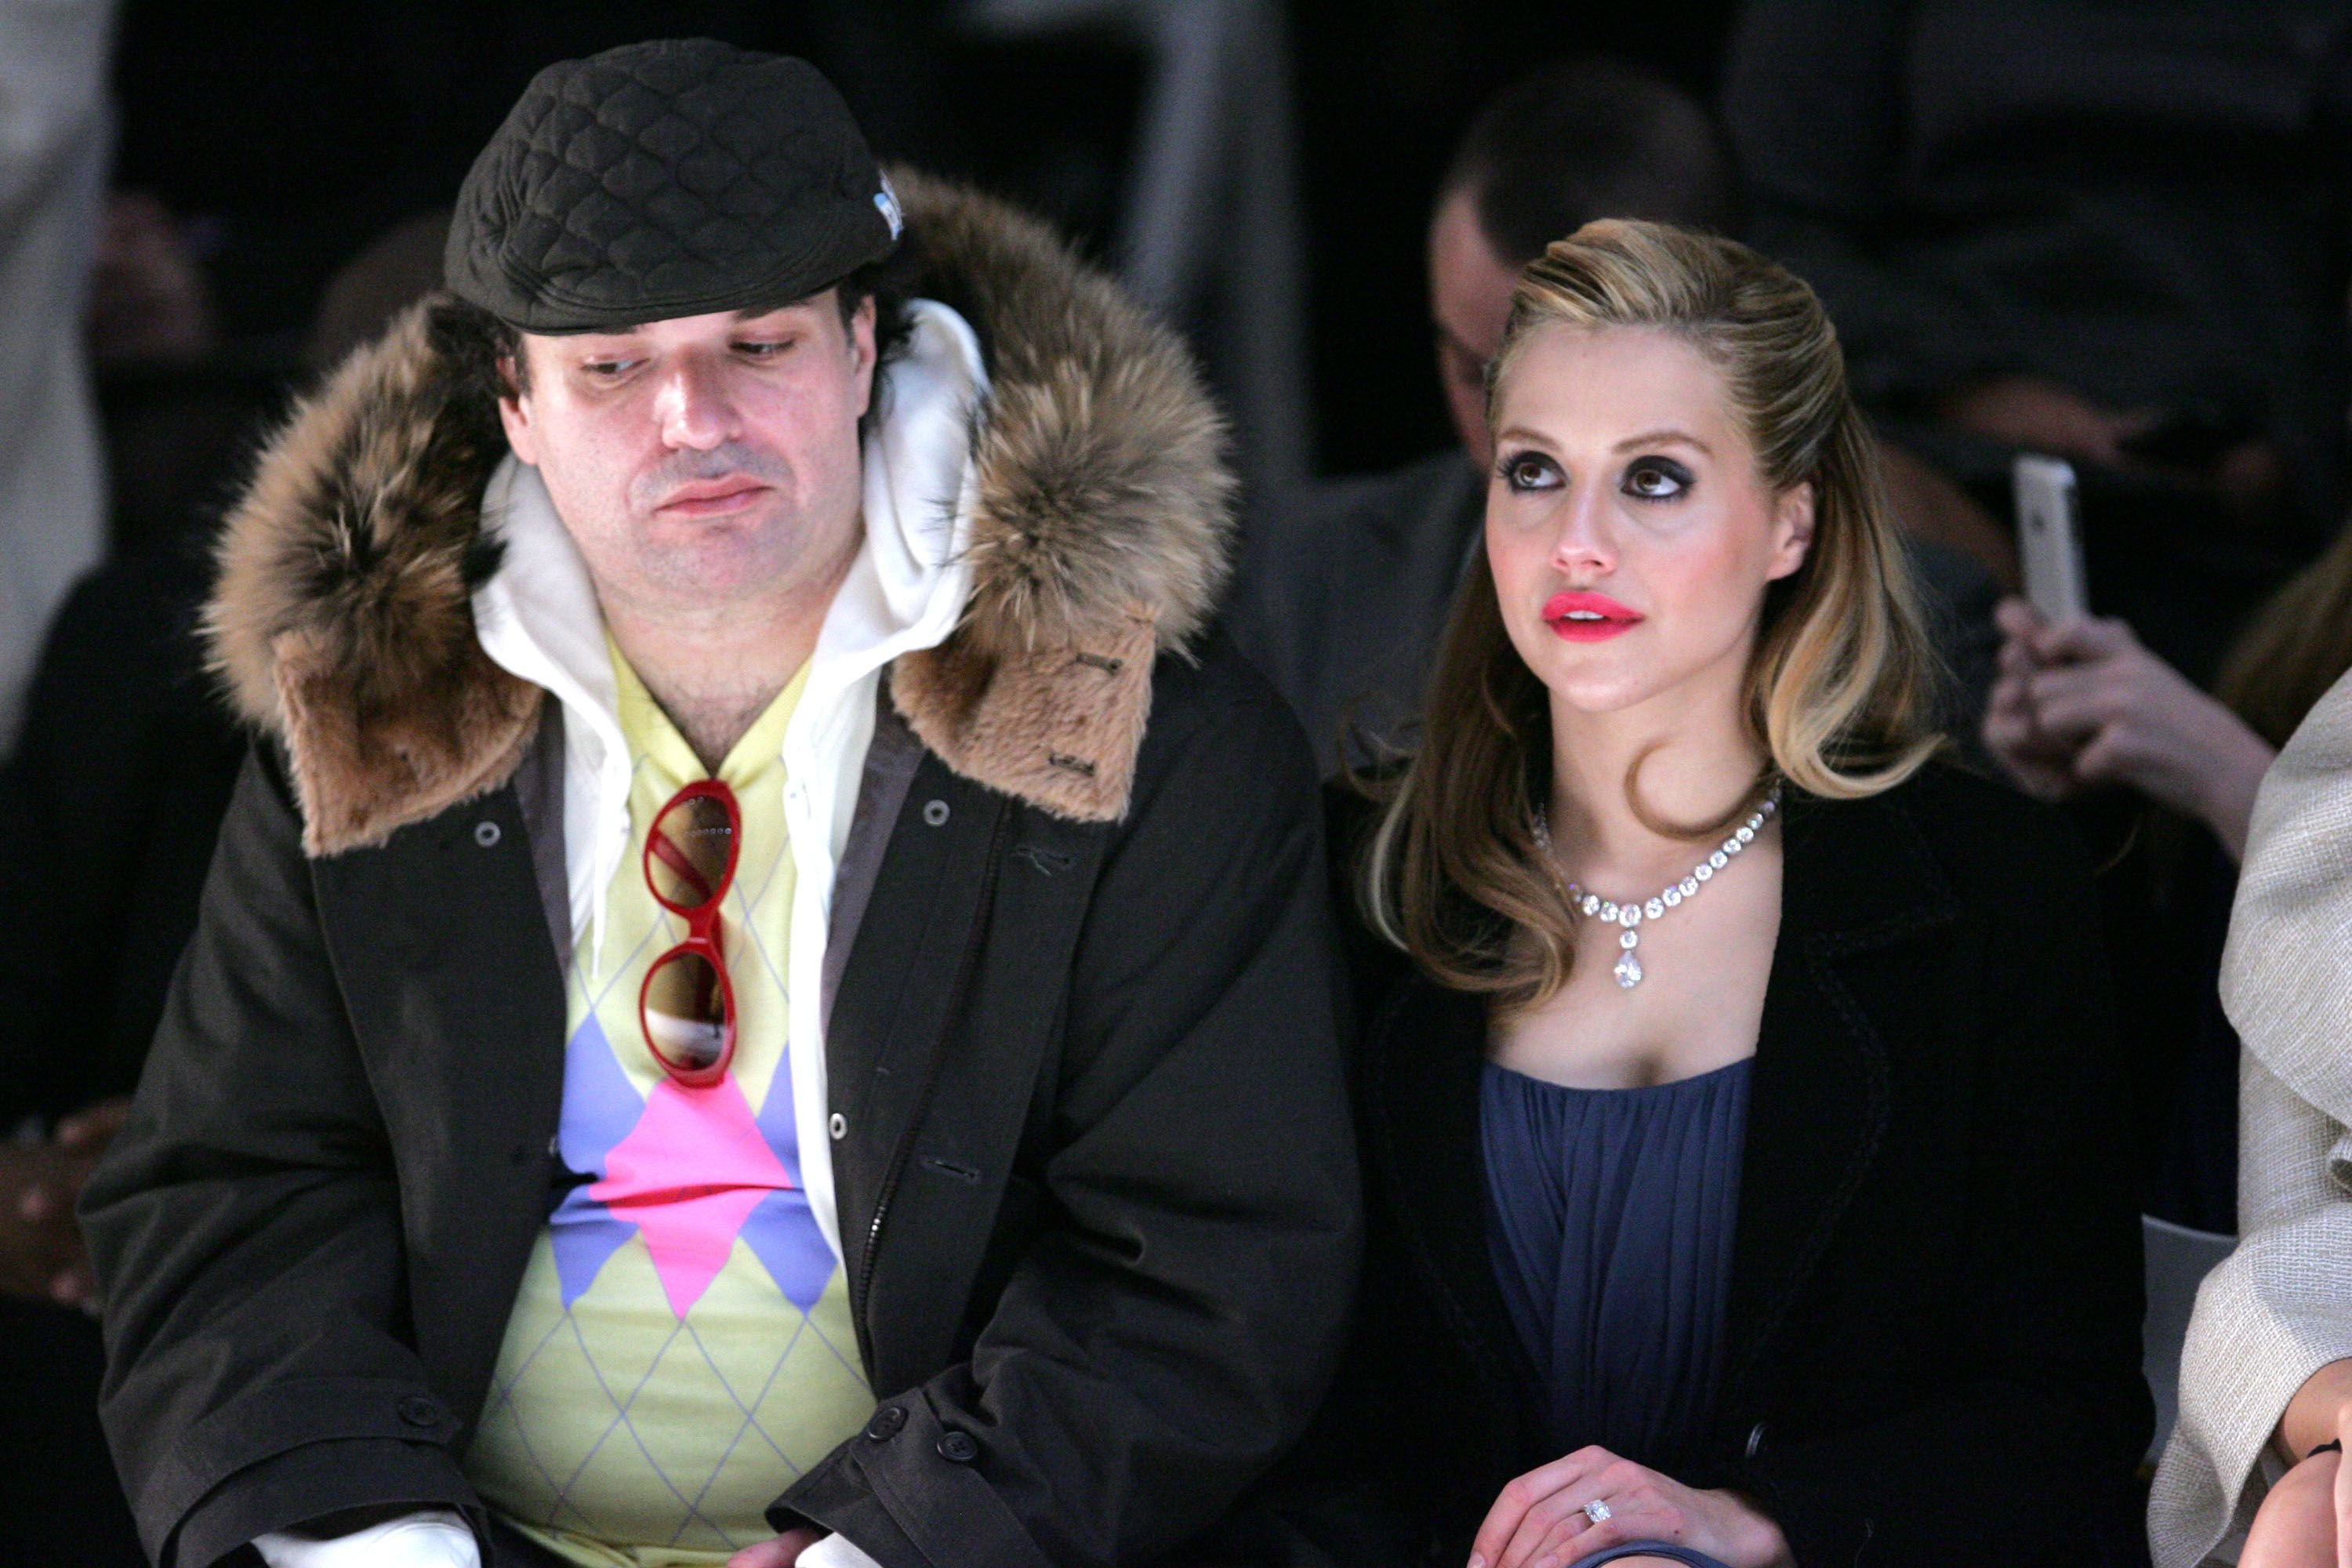 Actress Brittany Murphy and husband Simon Monjack at the Monique Lhuillier Fall 2008 fashion show during Mercedes-Benz Fashion Week Fall 2008 at The Promenade at Bryant Park in New York City | Photo: Bryan Bedder/Getty Images for IMG